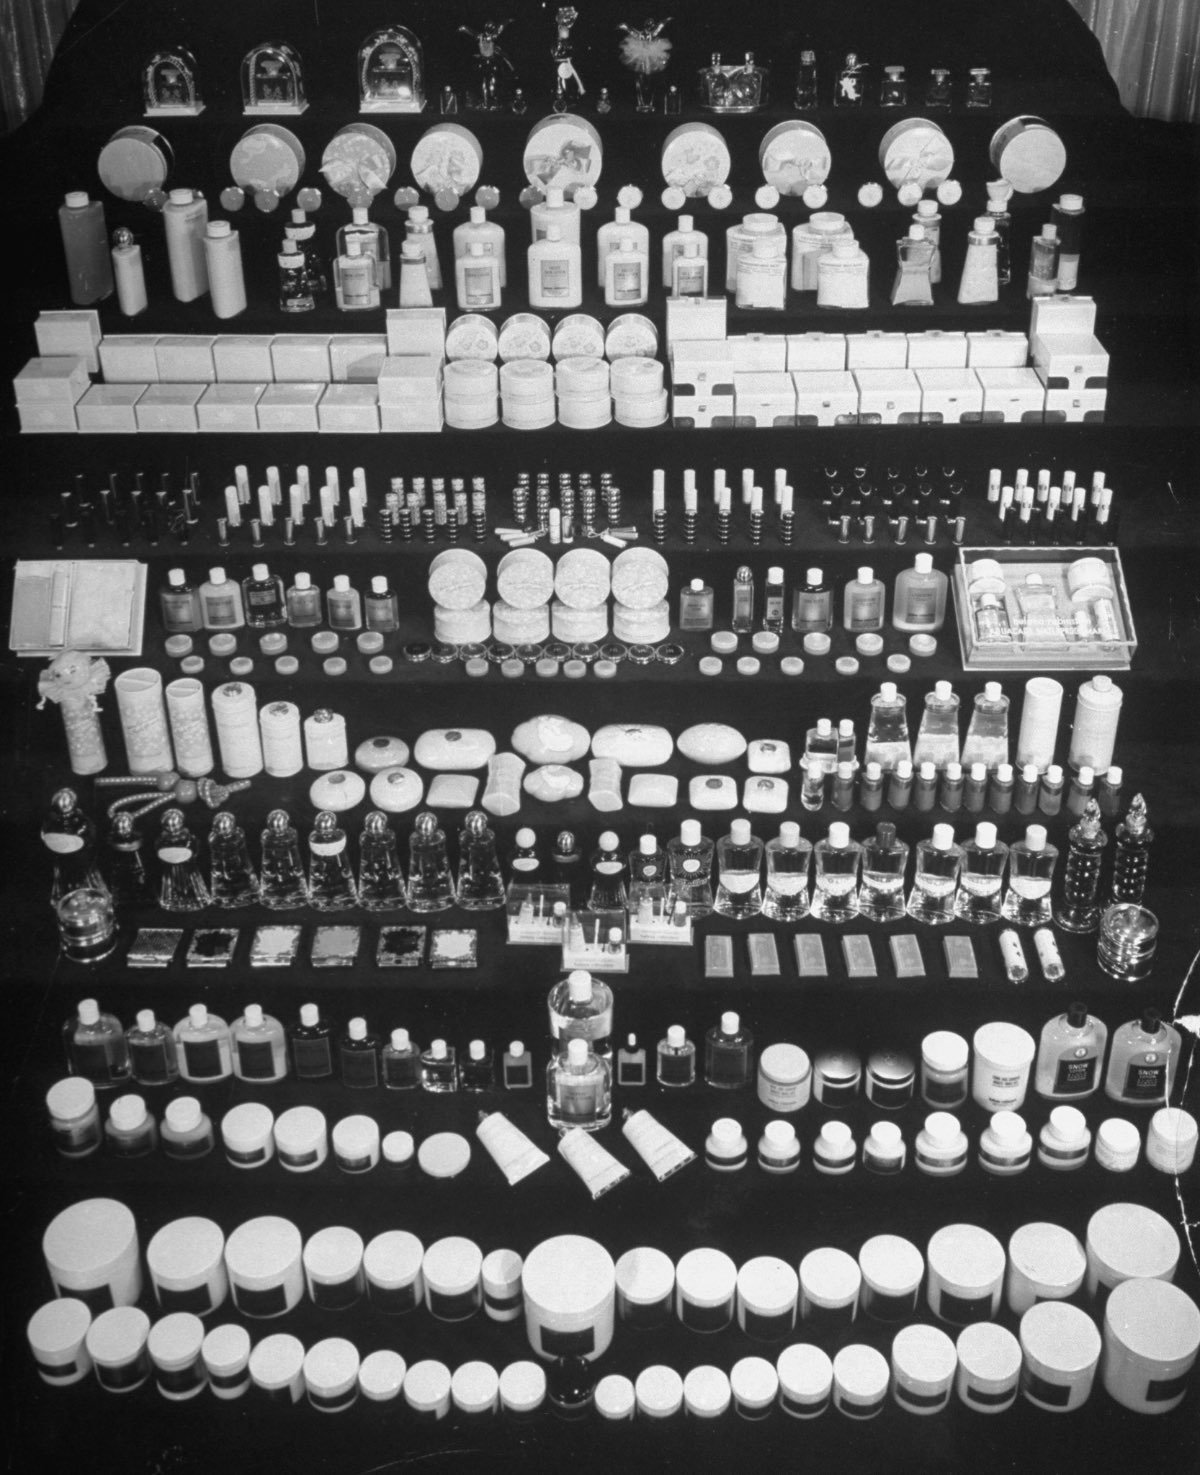 

The Full line of Helena Rubinstein beauty products by Alfred Eisenstaedt, 1937

